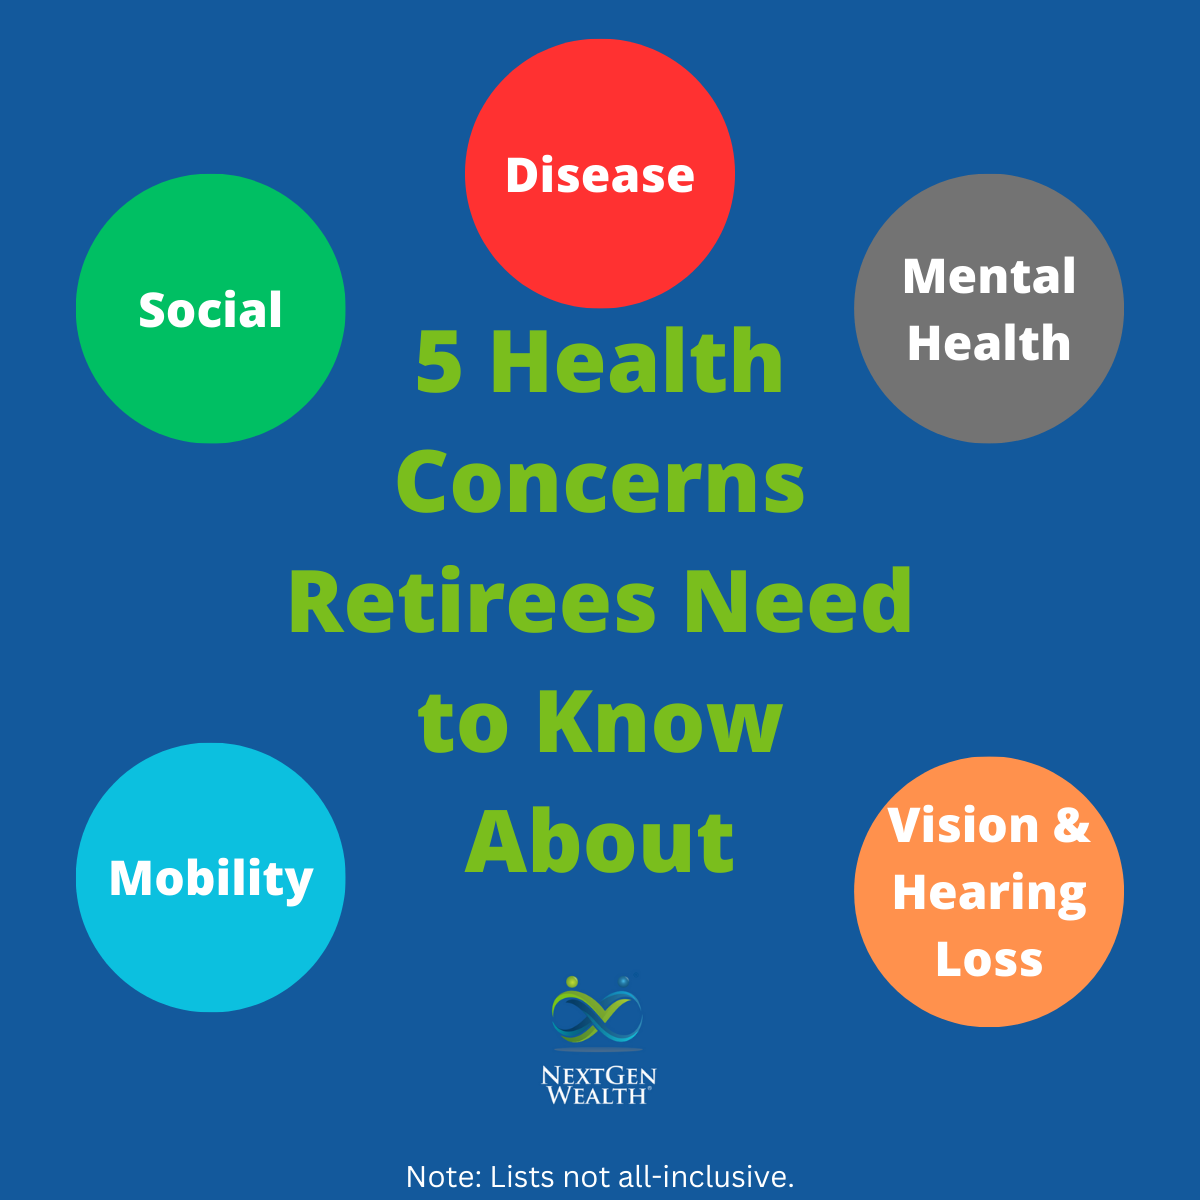 5 Health Concerns Retirees Need to Know About